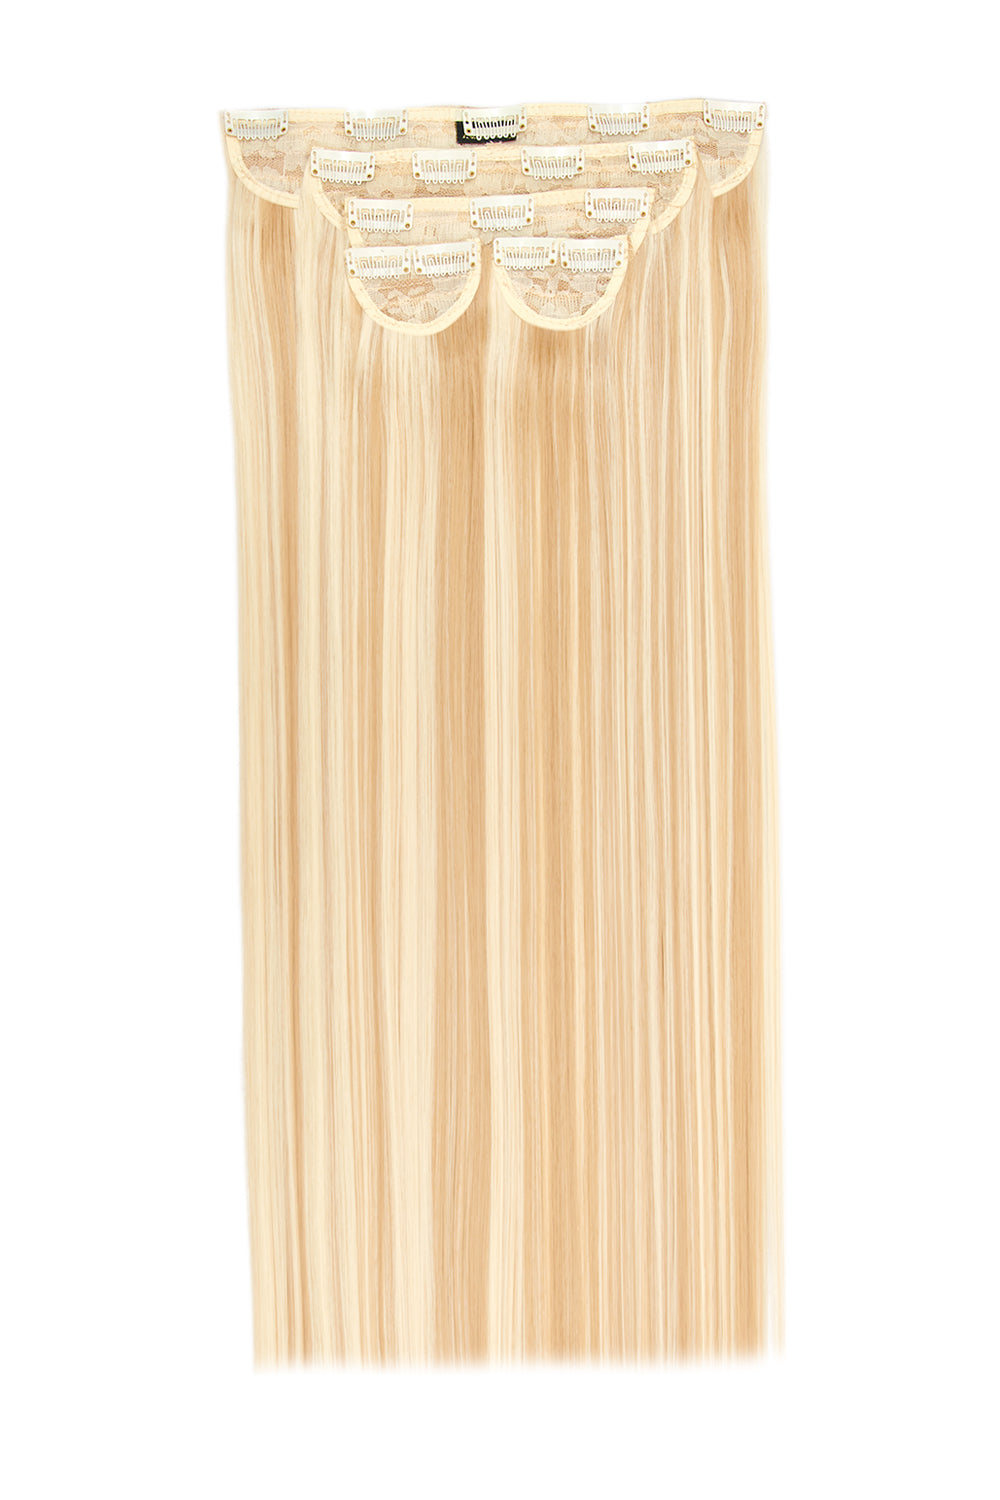 Super Thick 22" 5 Piece Straight Clip In Hair Extensions + Hair Care Bundle - Highlighted Champagne